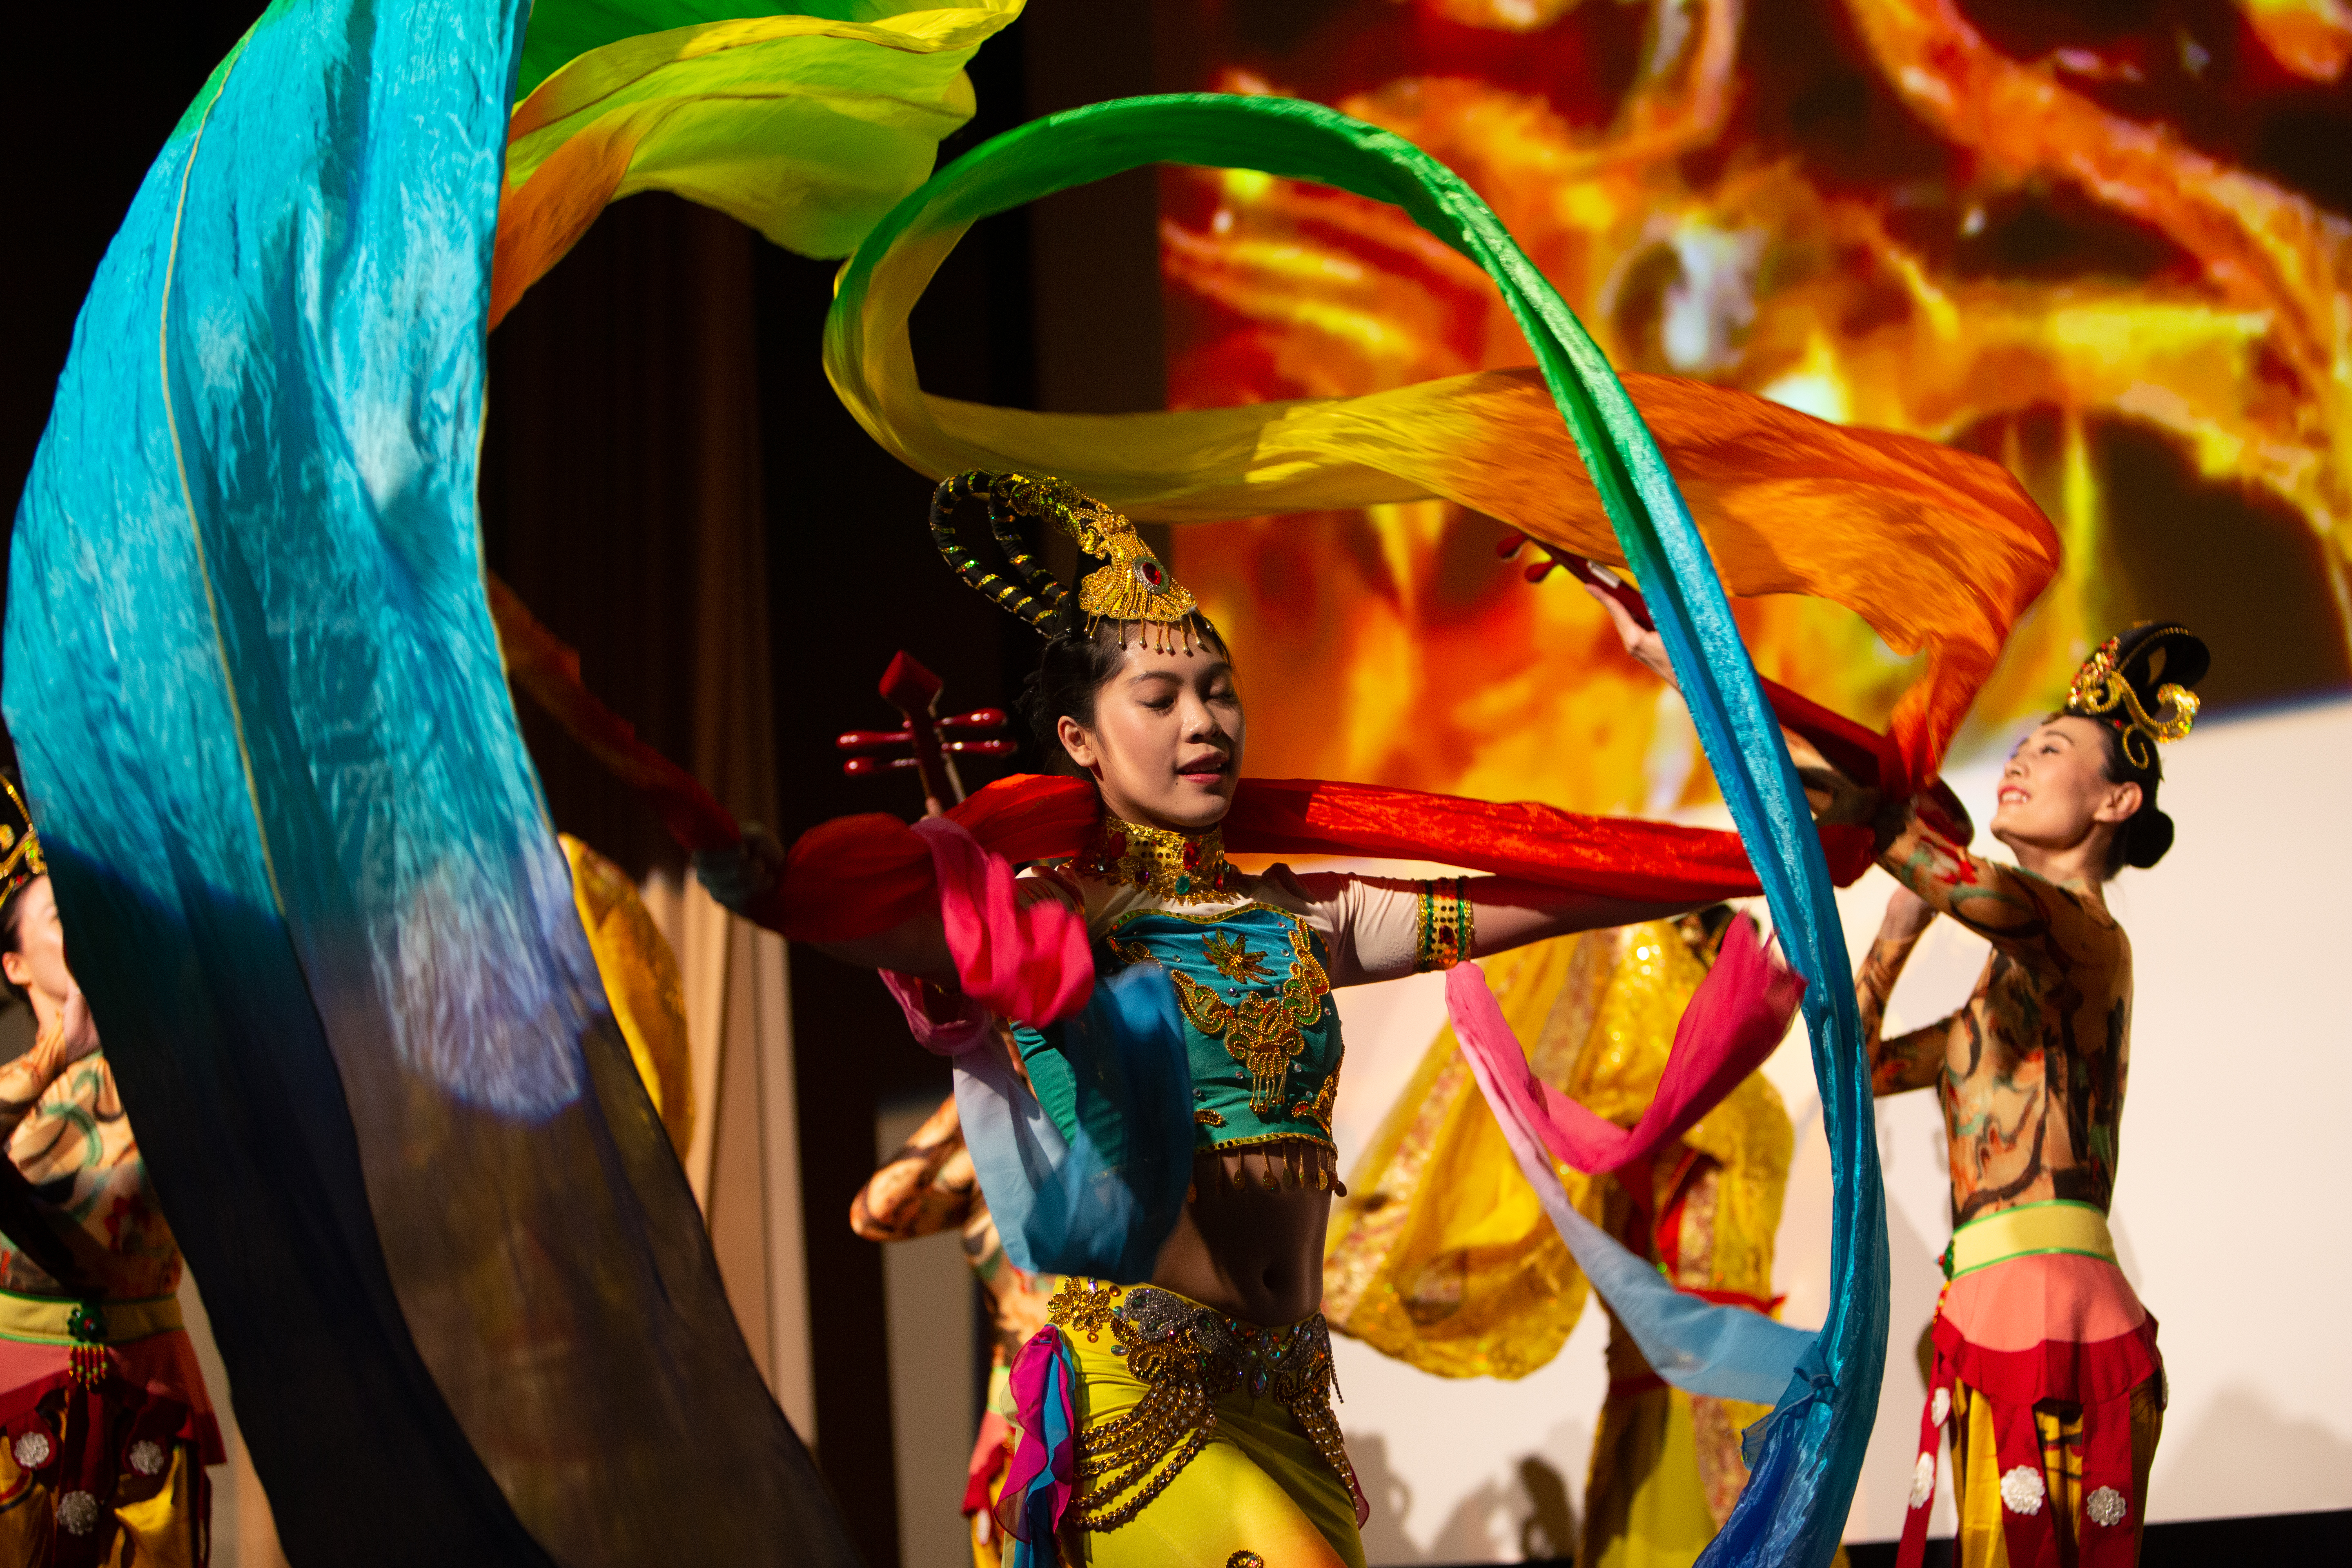 Members of the Hao Dance Chinese dance studio perform during DePaul University’s 12th annual celebration of the Chinese lunar new year. (DePaul University/Randall Spriggs)